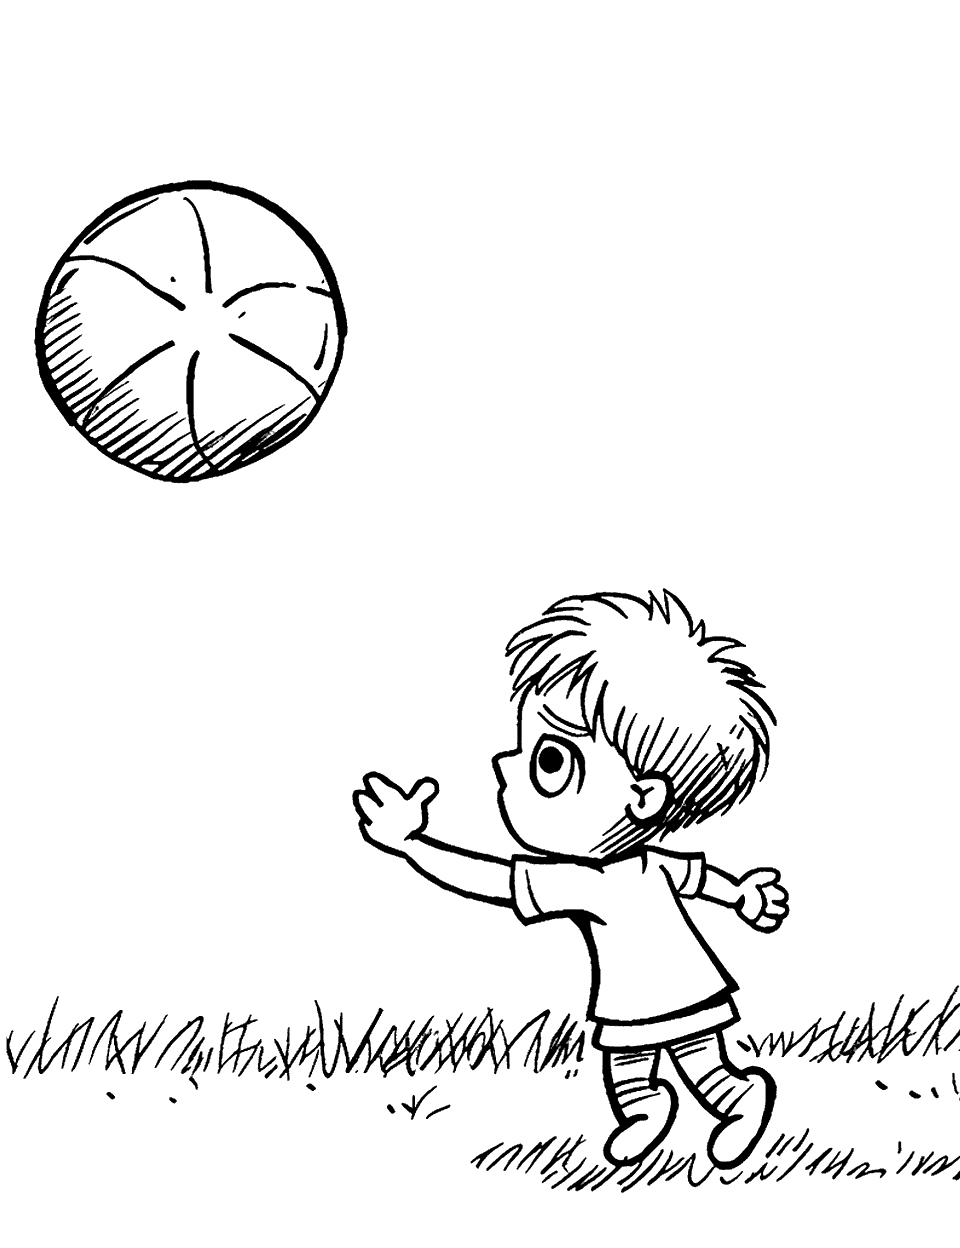 Playtime with a Ball Toddler Coloring Page - A toddler chasing a large ball in an open space.